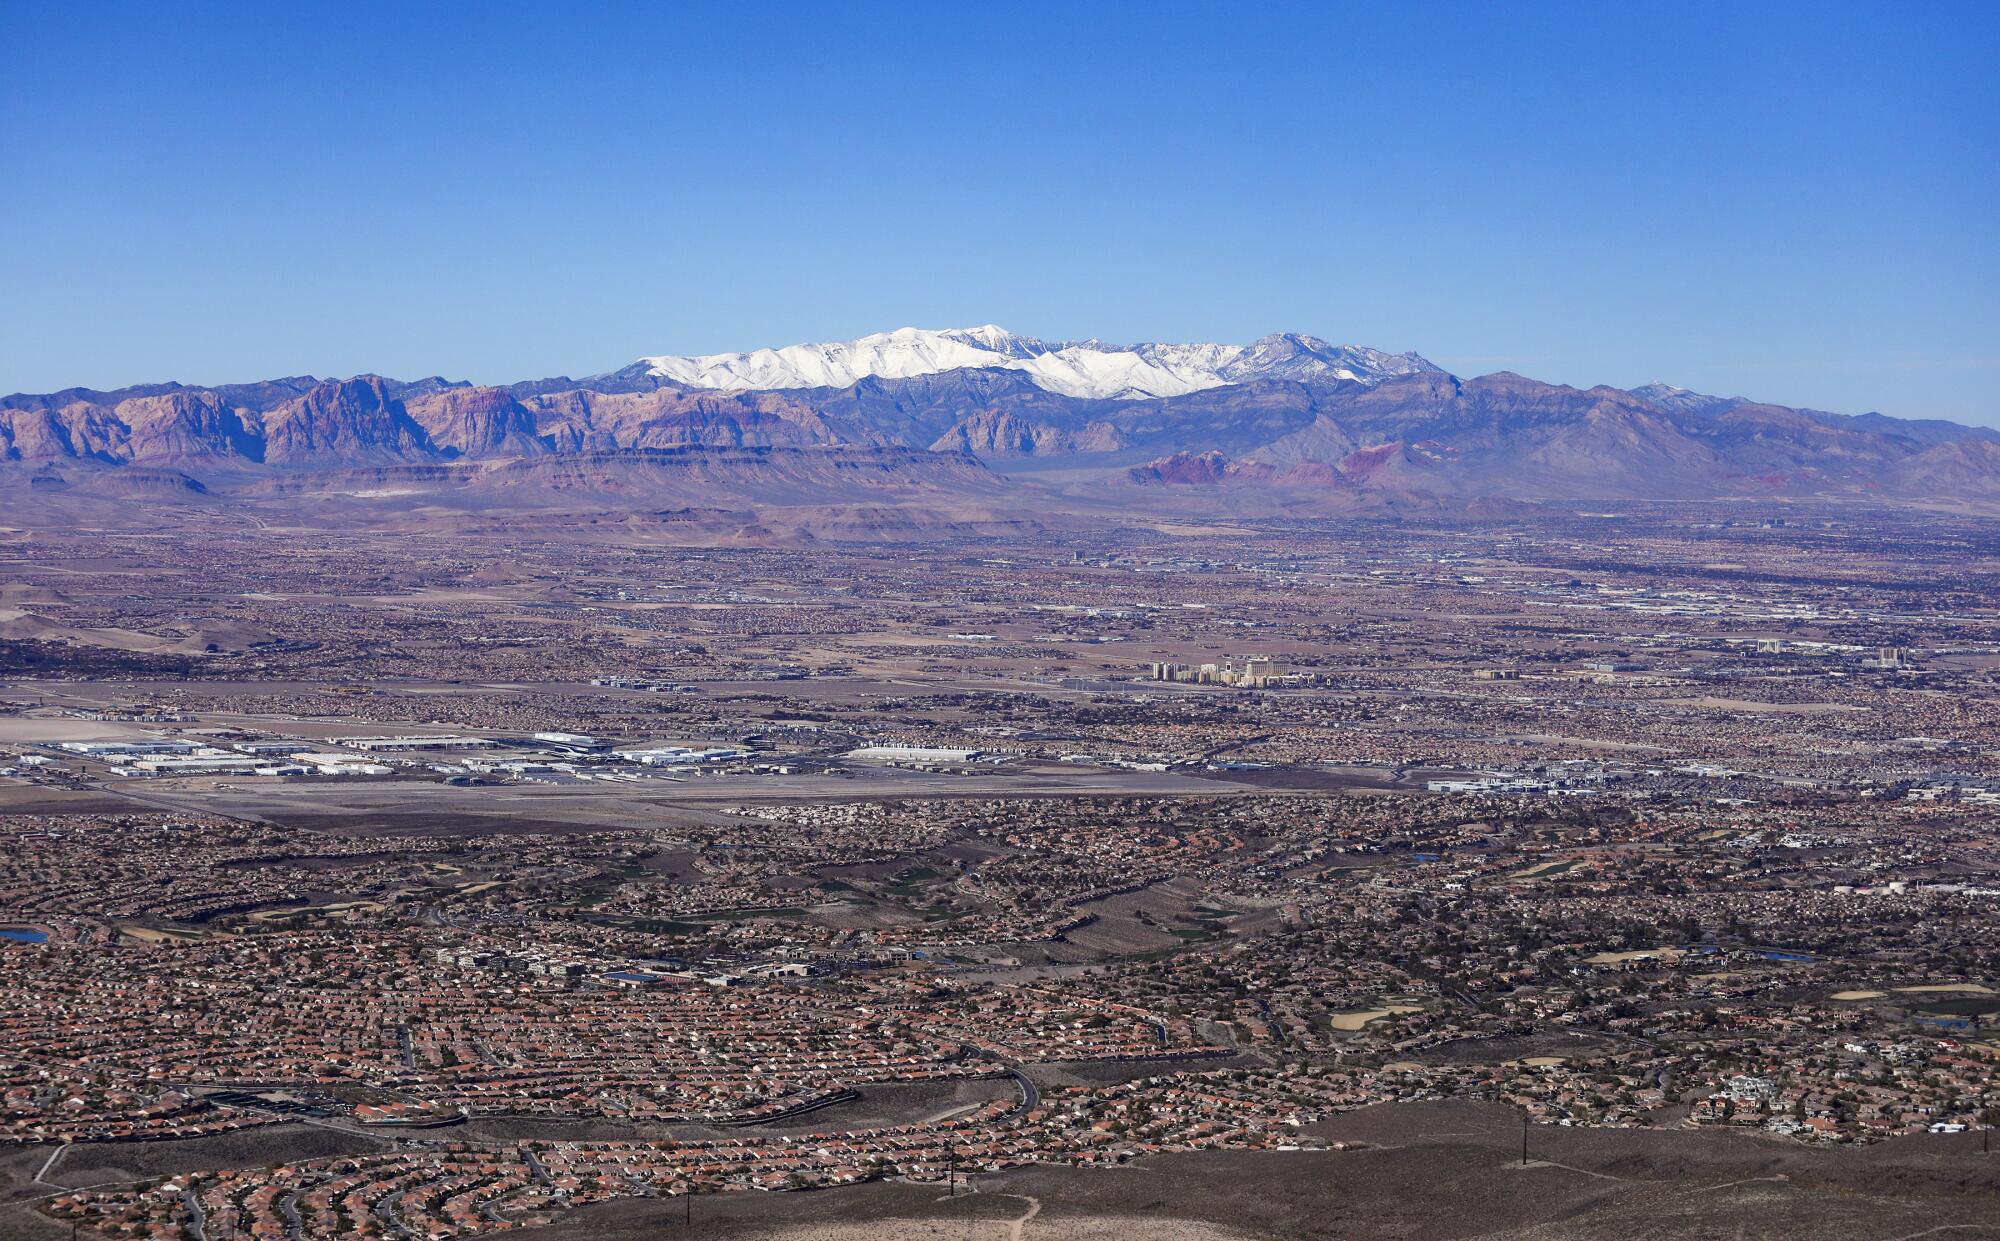 A view of the Las Vegas Valley from Black Mountain.